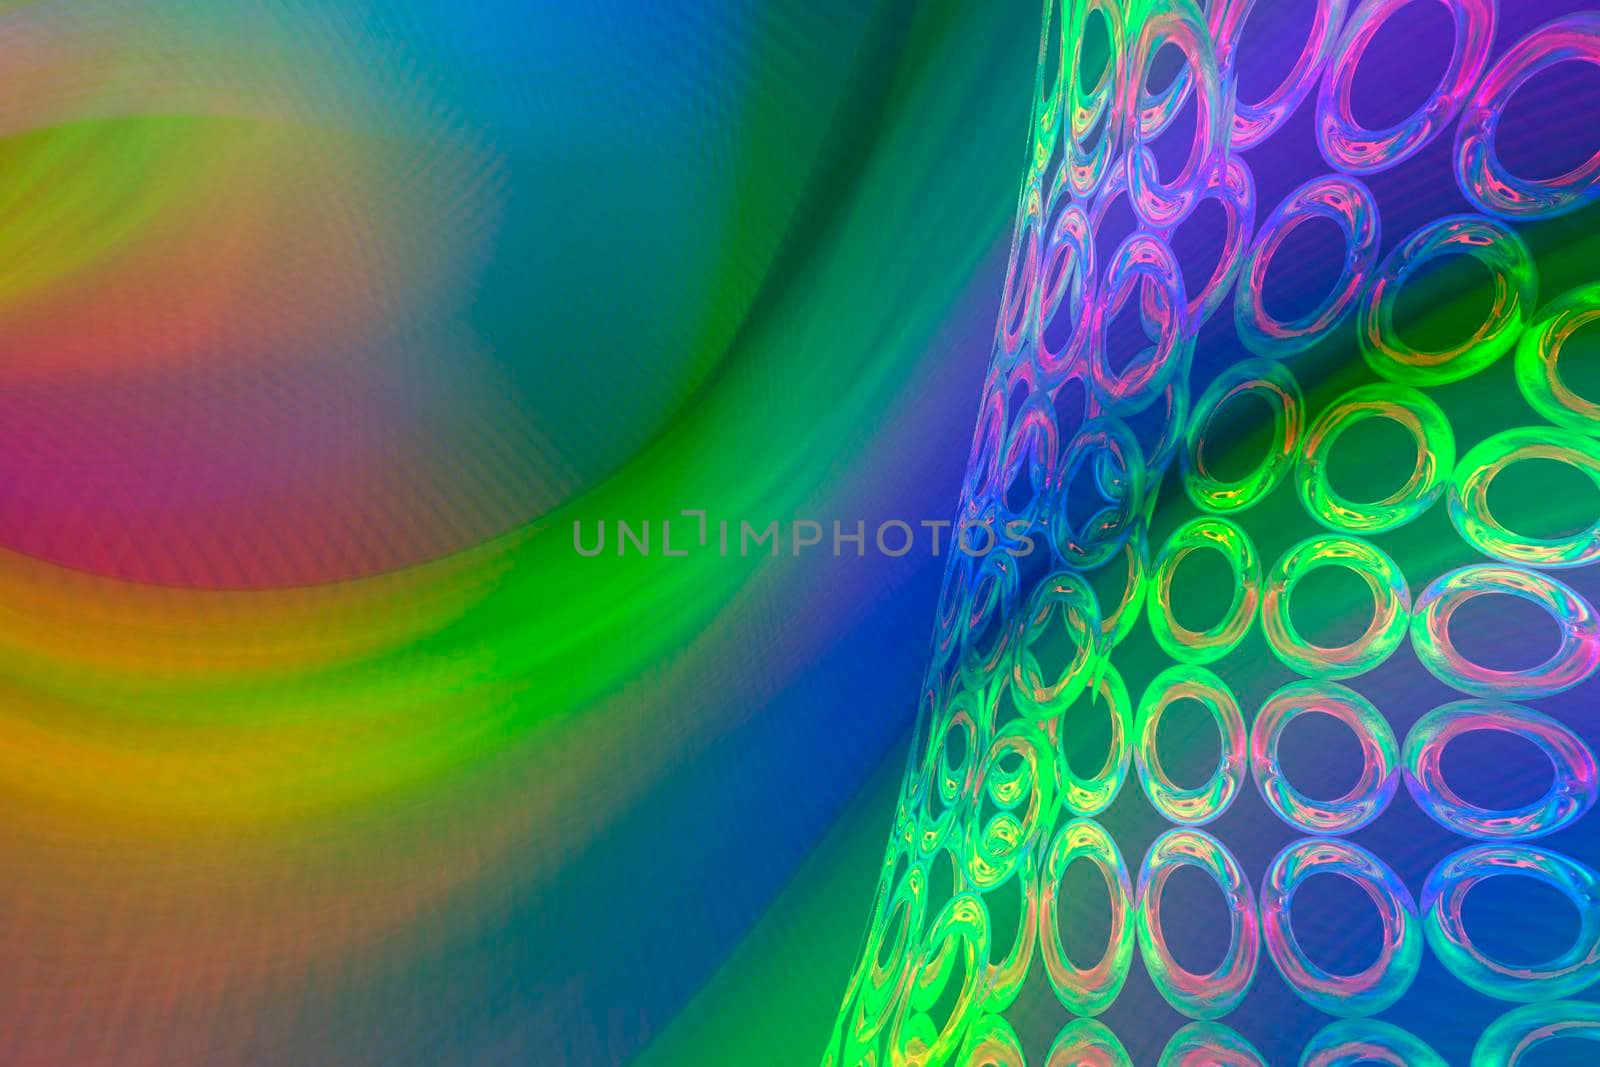 A beautiful rainbow background with an iridescent grid of rings.